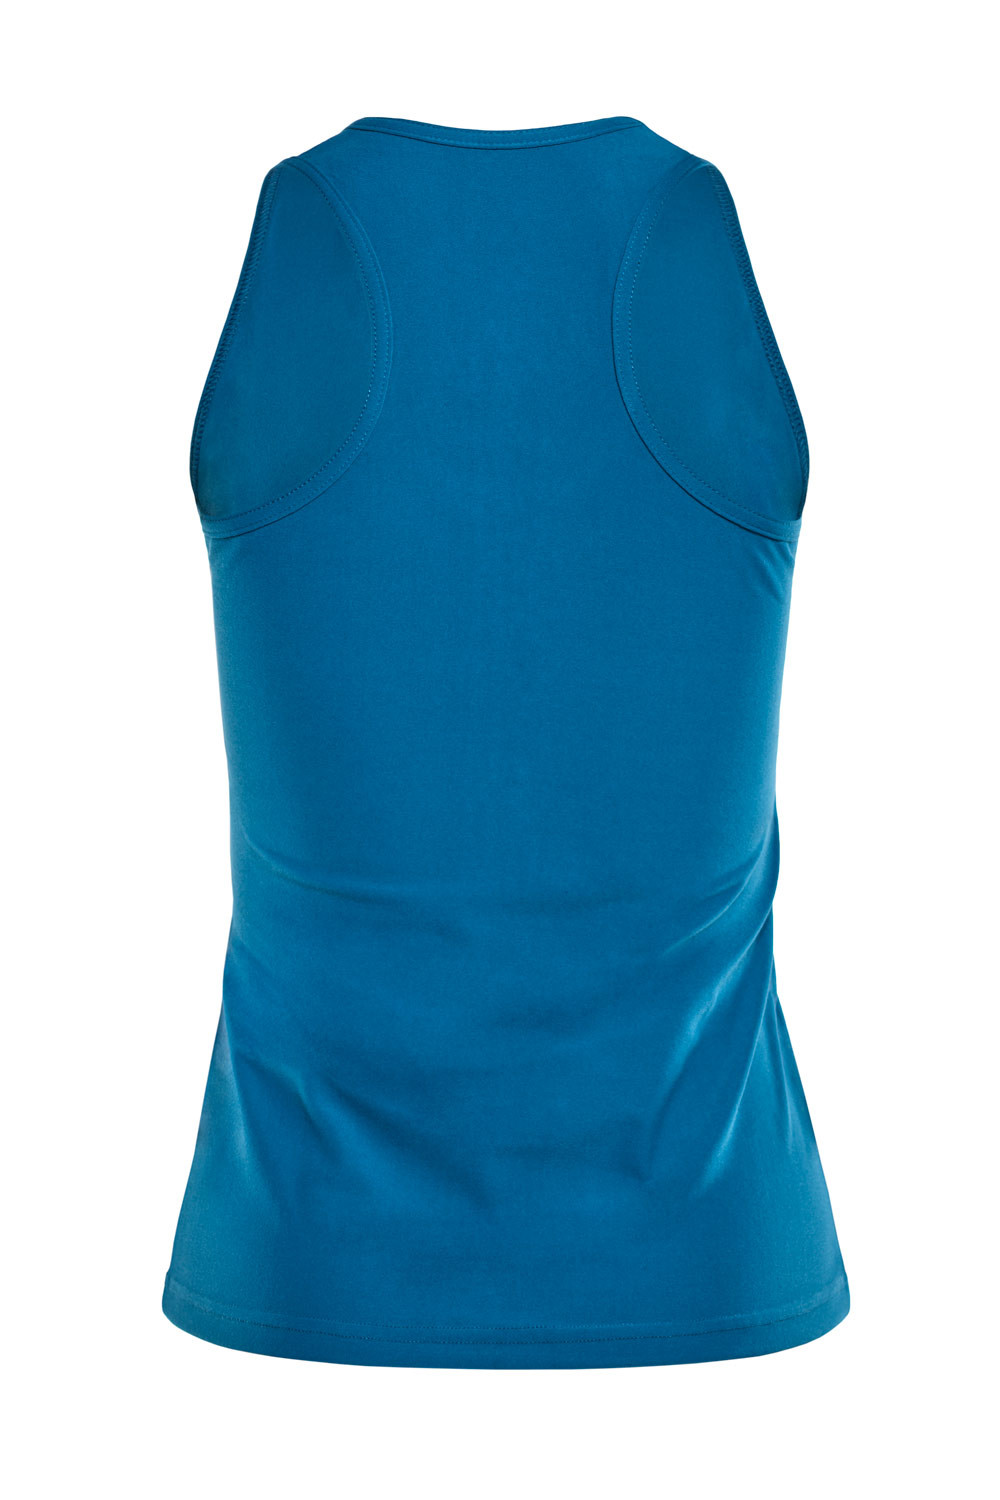 Functional Style Ultra Soft Soft AET124LS, Winshape and Tanktop Light teal green,